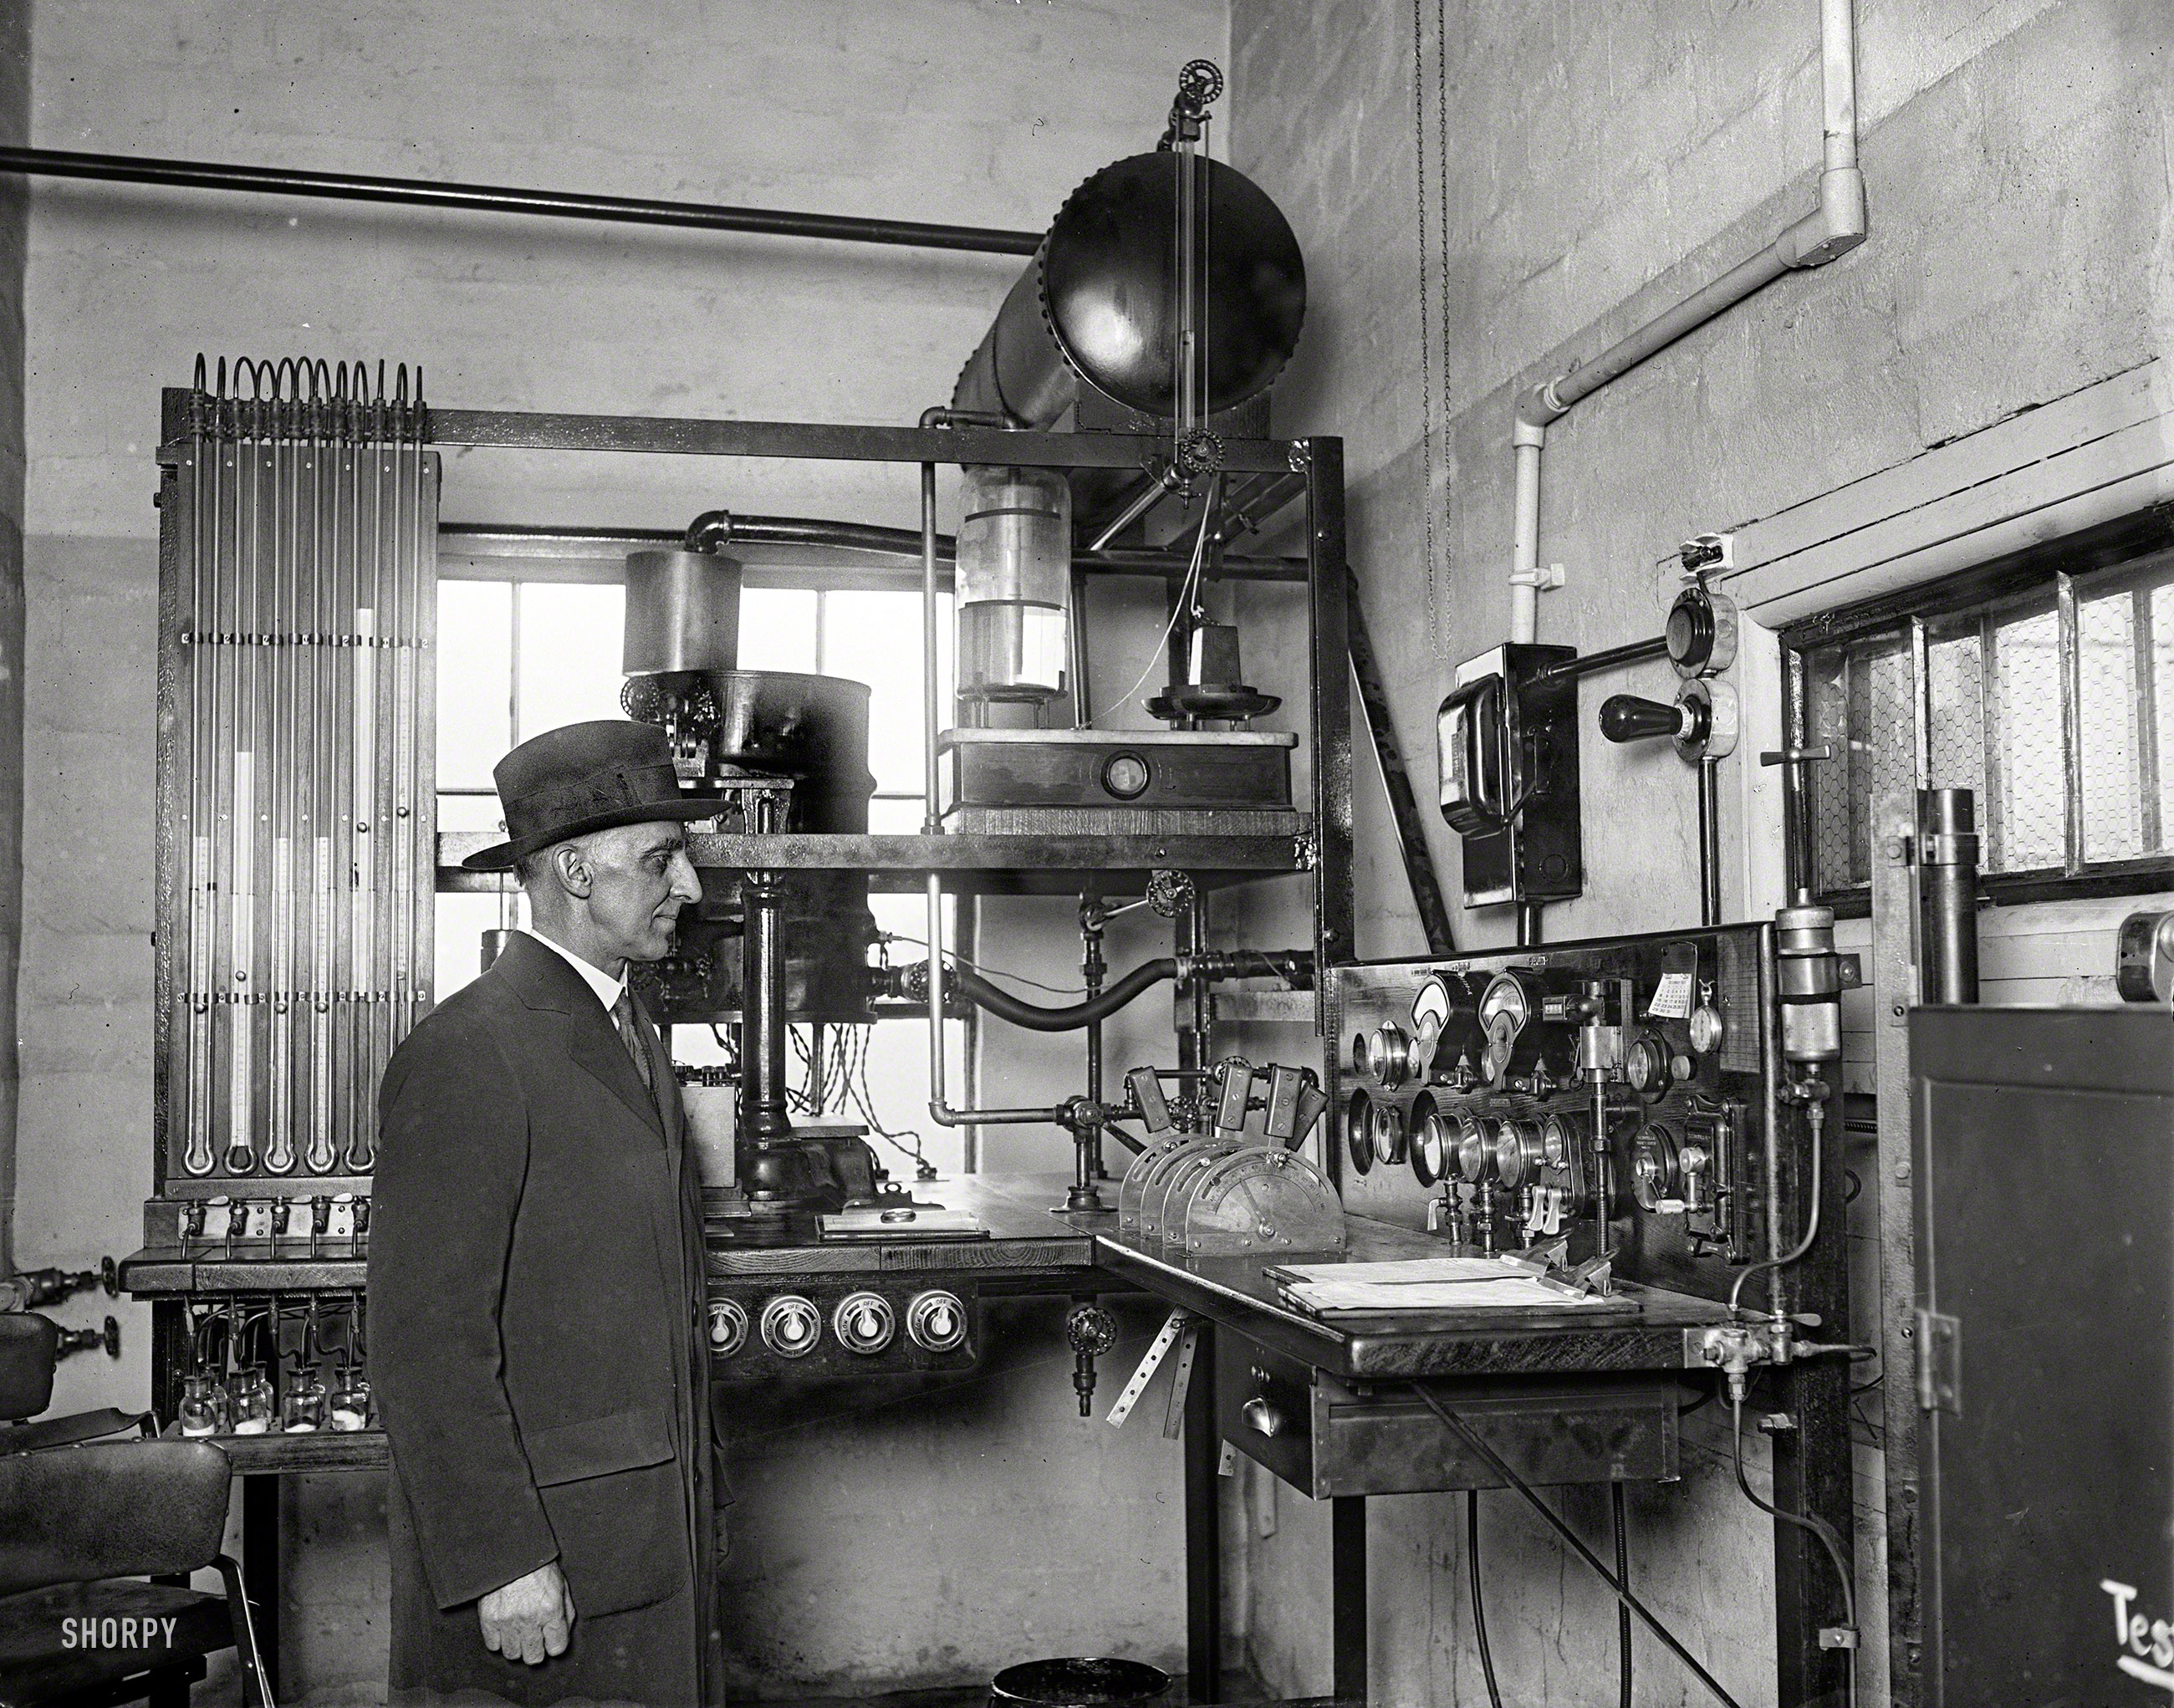 December 30, 1929. "Dr. K.C. Dickinson, chief of the Heat and Power Division of the Bureau of Standards, and the control room of the new aircraft engine testing laboratory at Arlington, Virginia. Here all engines for use on licensed airplanes are to be tested. The control room and the room in which the engines are mounted are heavily reinforced with concrete to prevent flying engine parts striking the observers." Harris & Ewing Collection glass negative. View full size.